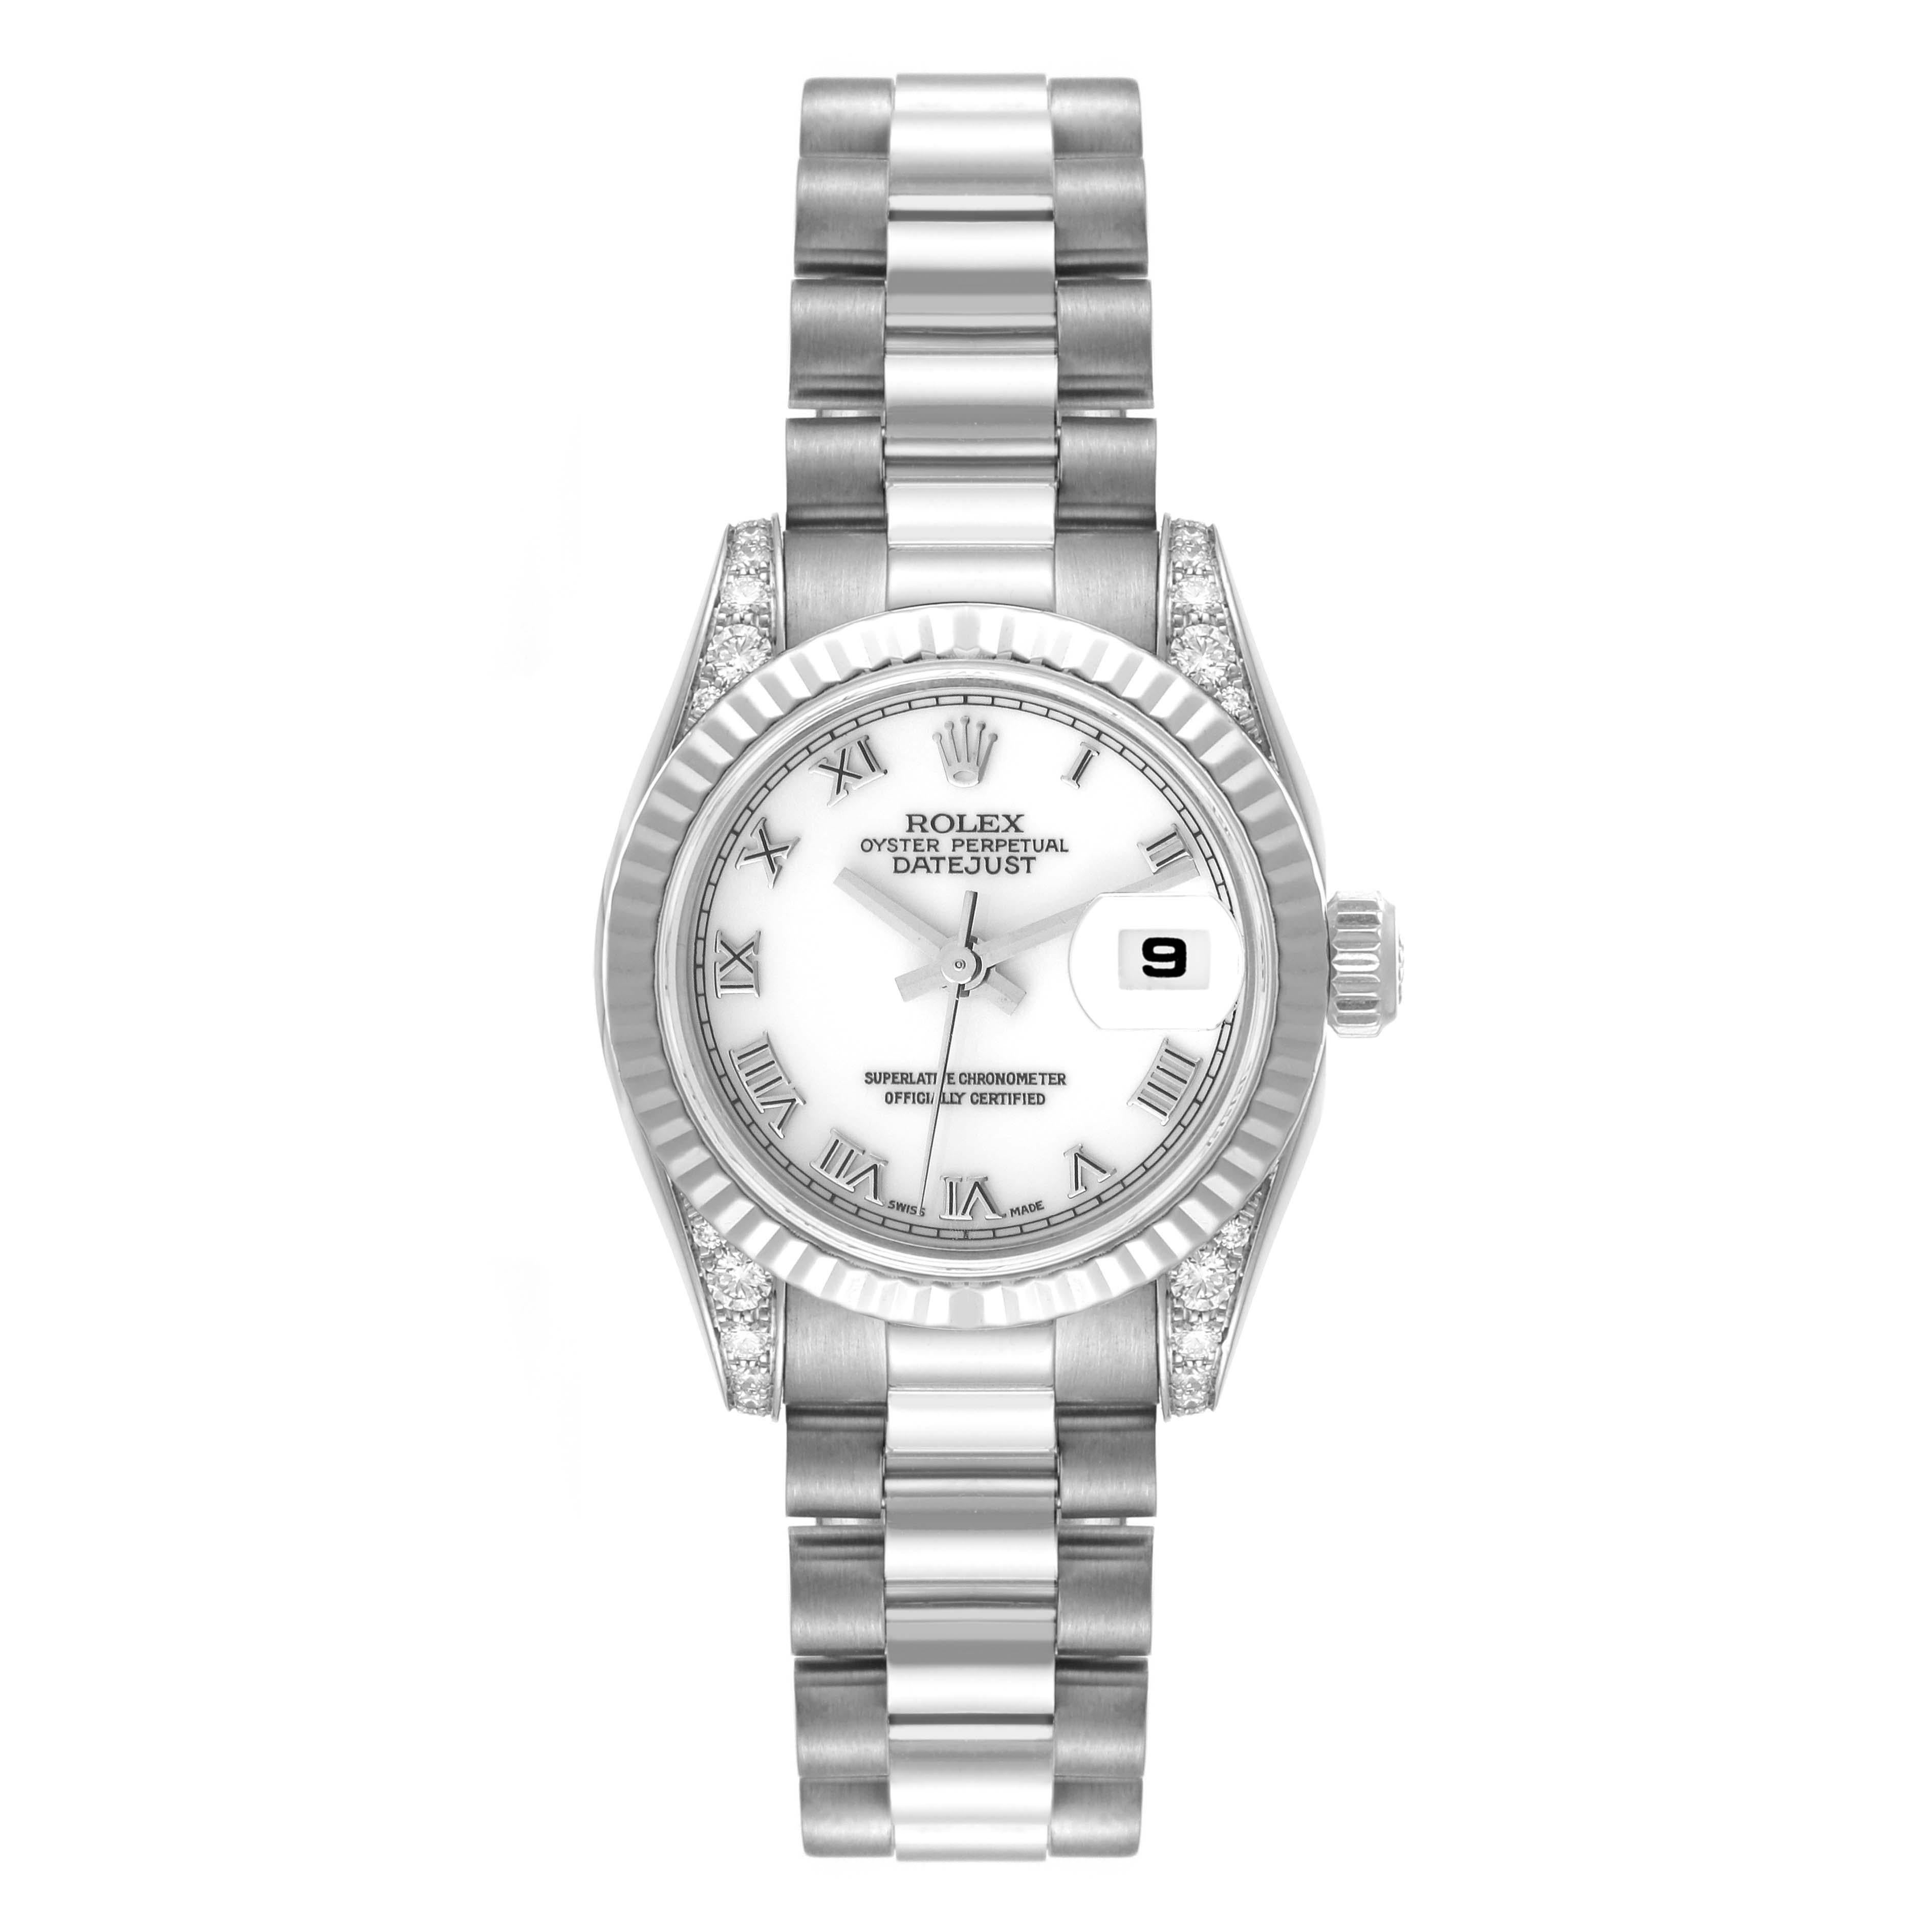 Rolex President Roman Dial White Gold Diamond Ladies Watch 179239. Officially certified chronometer automatic self-winding movement. 18k white gold oyster case 26.0 mm in diameter. Rolex logo on the crown. Original Rolex factory diamond-set lugs.